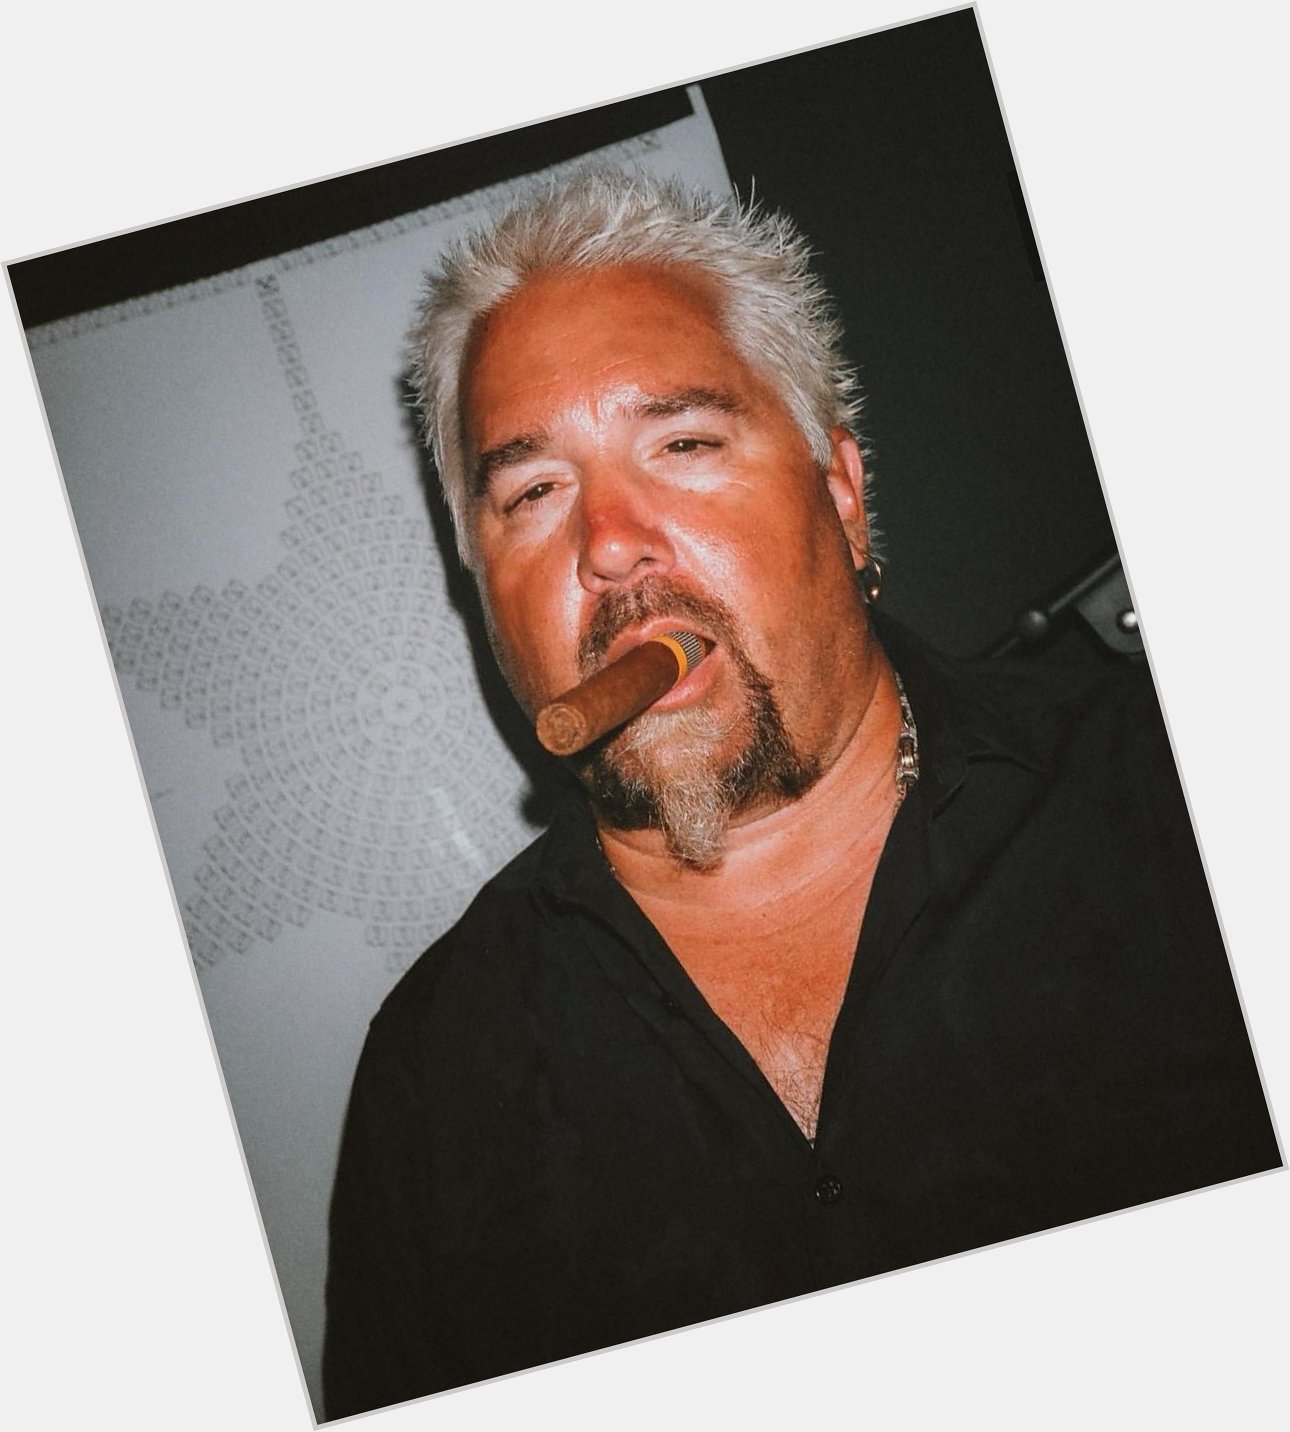 Oh shit bruh happy birthday to the homie guy fieri who be smokin all the burgers 